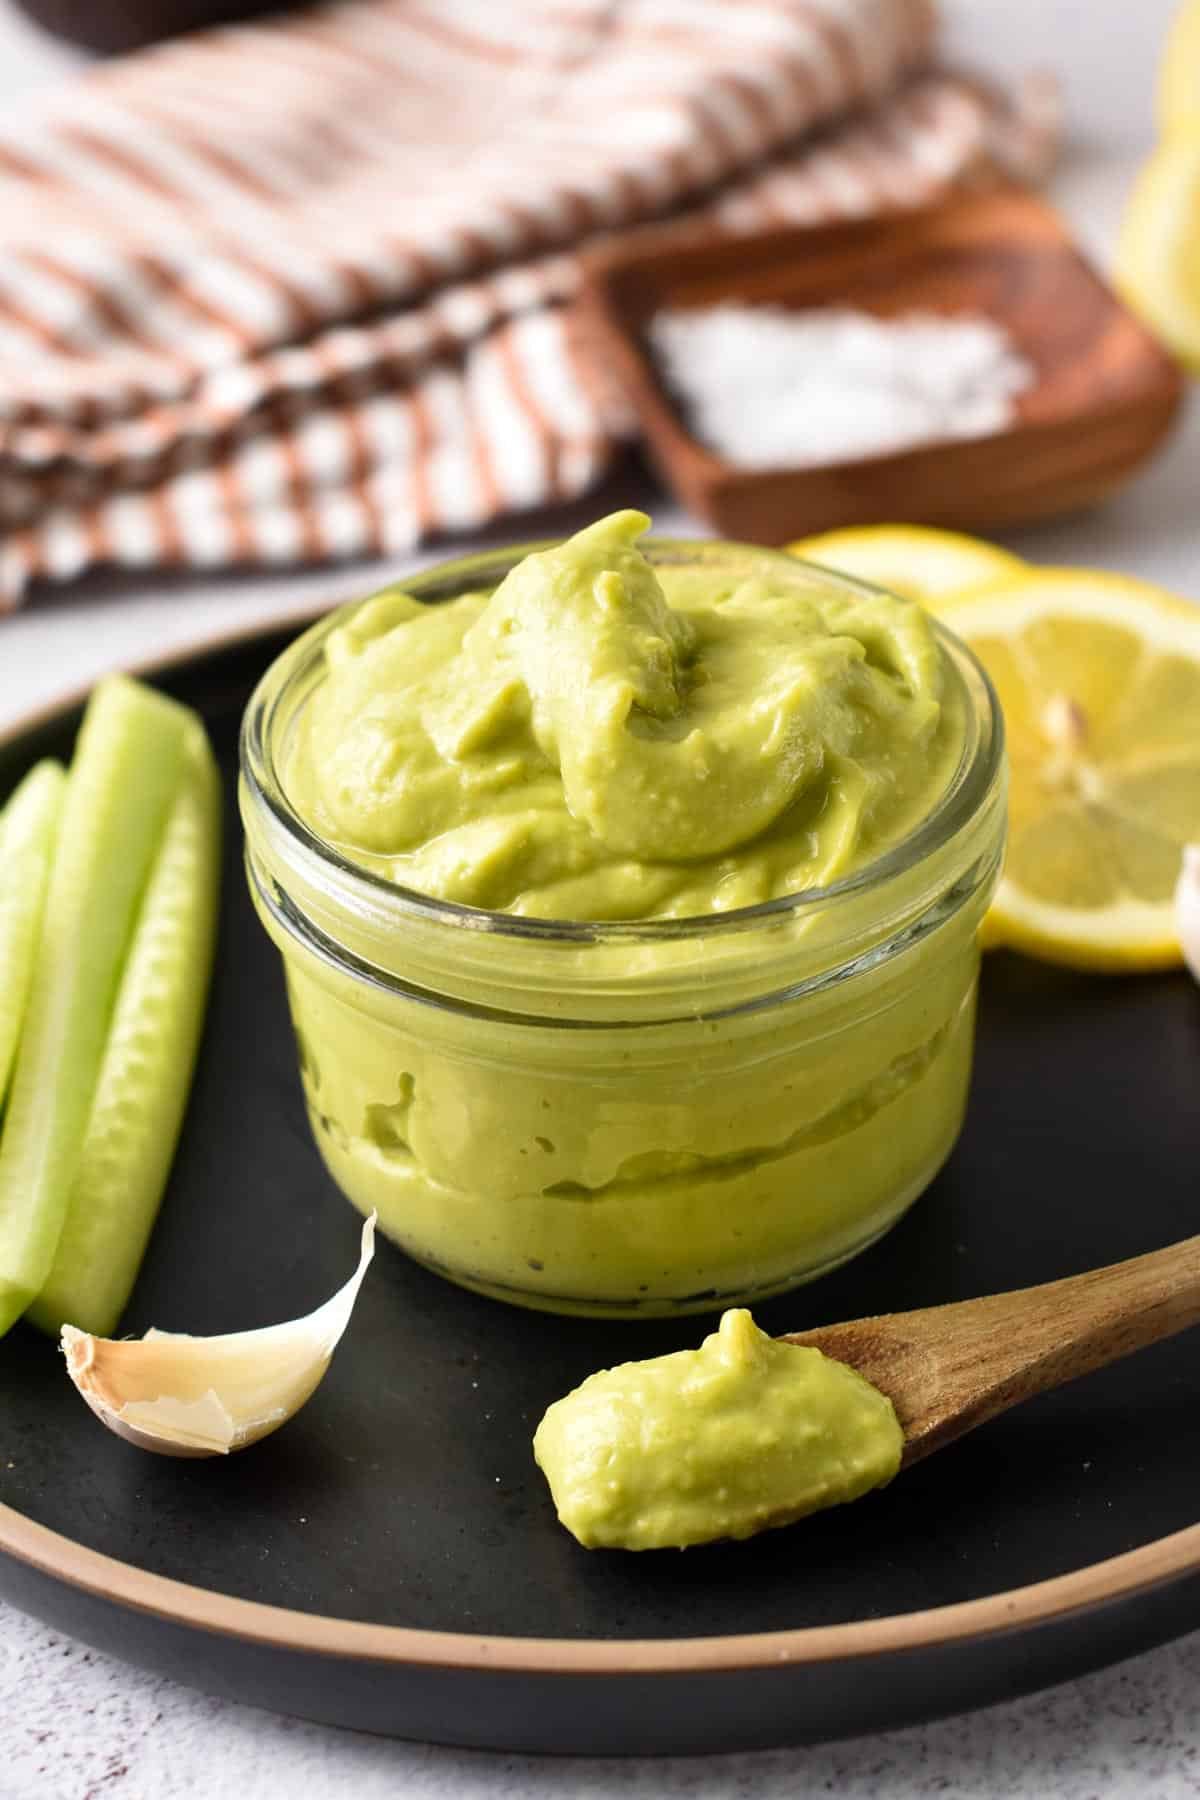 This Avocado Mayonnaise is an healthy creamy mayonnaise made from avocado instead of eggs. It's an egg-free mayo with healthy fats from avocado and avocado oil perfect to spread on sandwiches